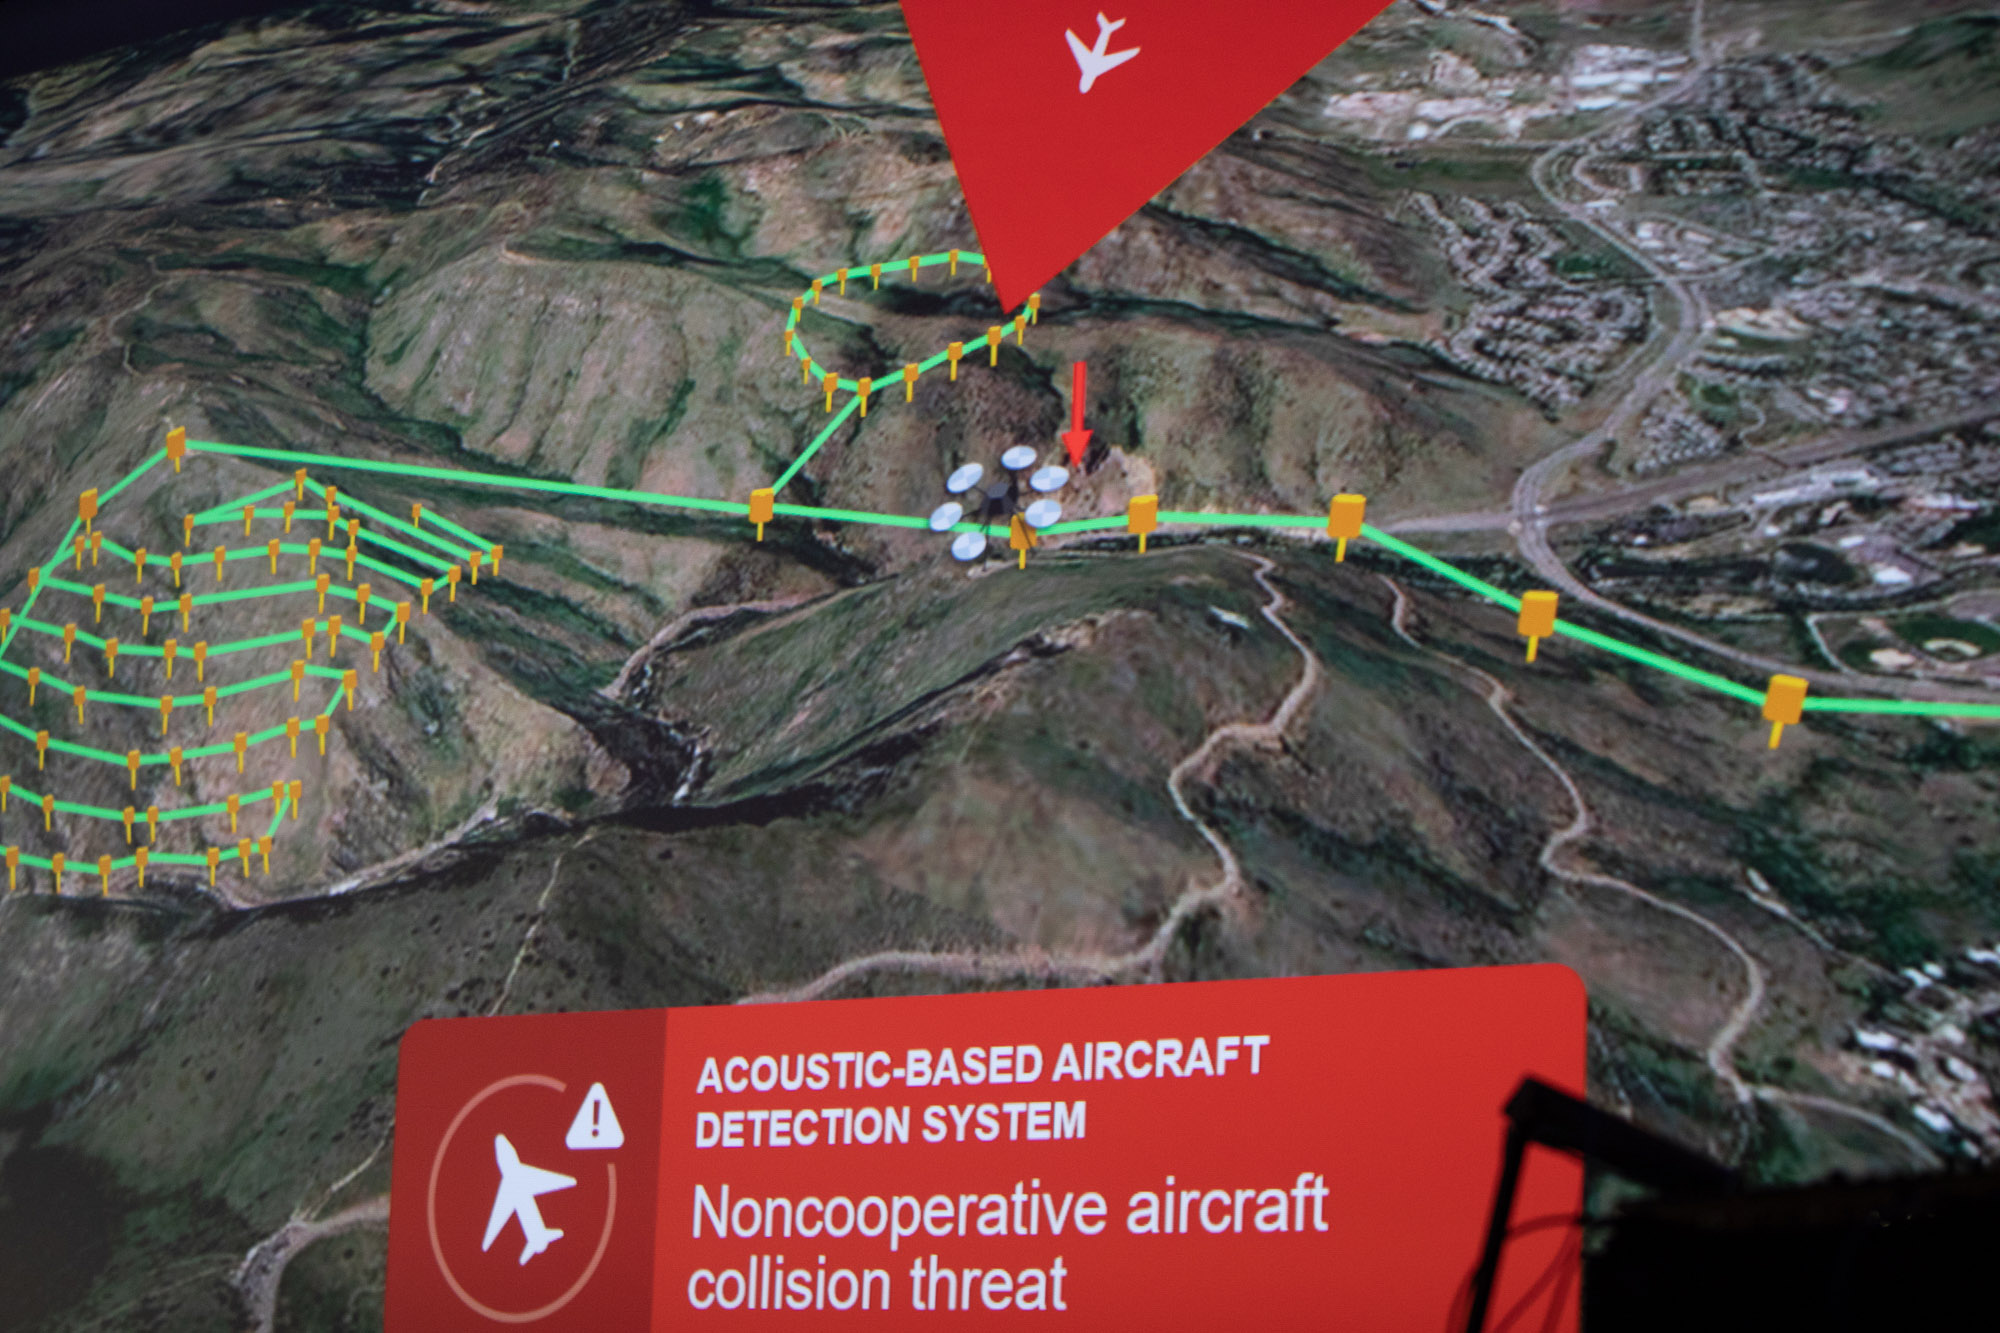 PrecisionHawk illustrated its acoustic detection system with this graphic showing an aircraft approaching a drone, which will automatically land if there is a collision threat.